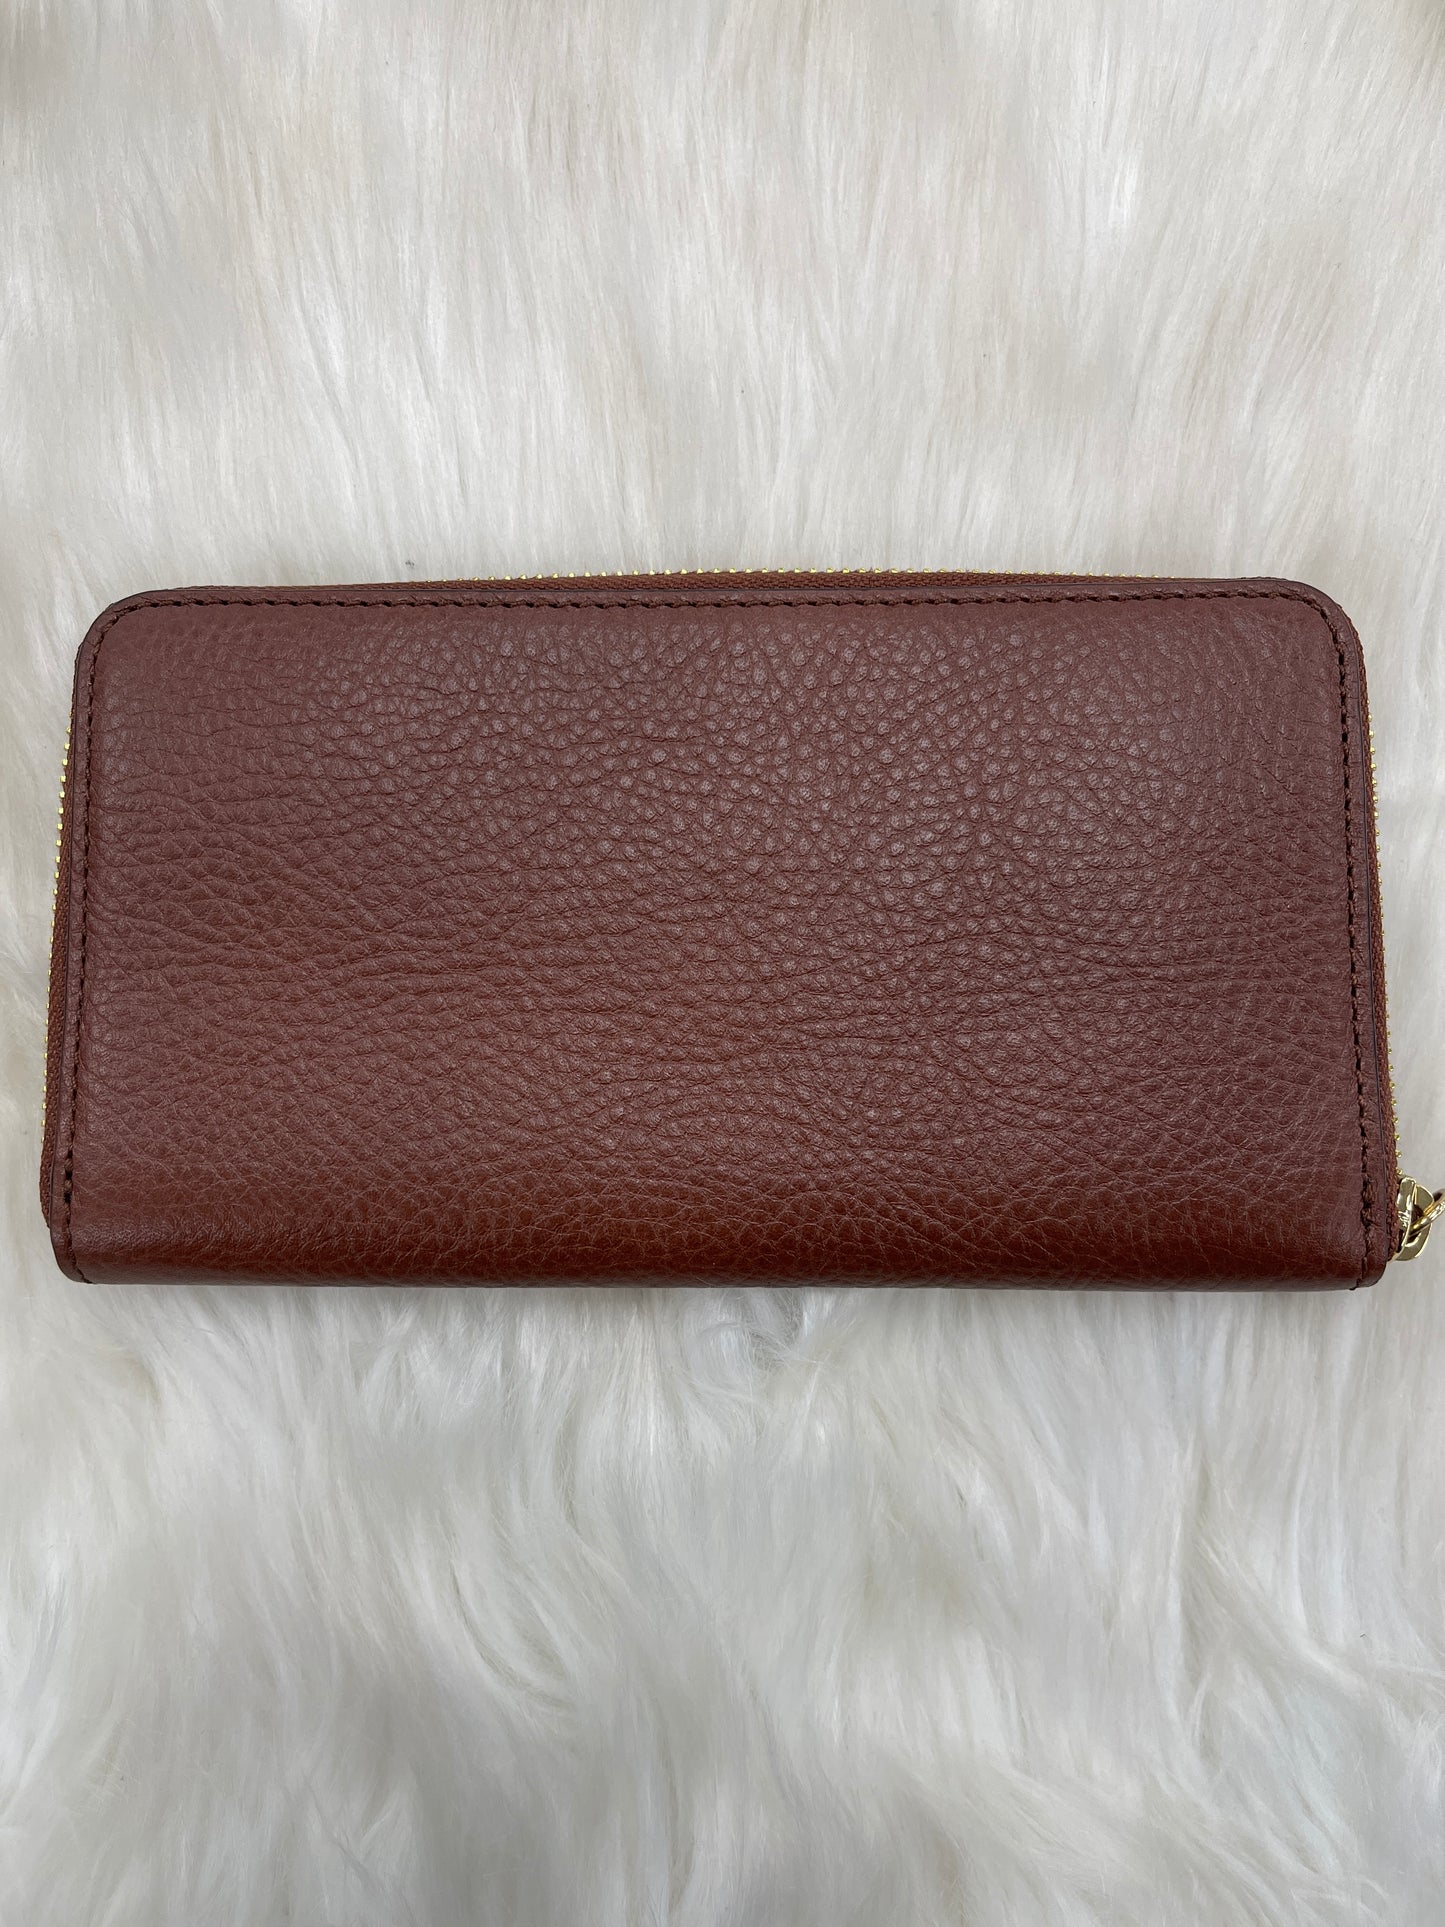 Wallet Leather By Cmb  Size: Medium